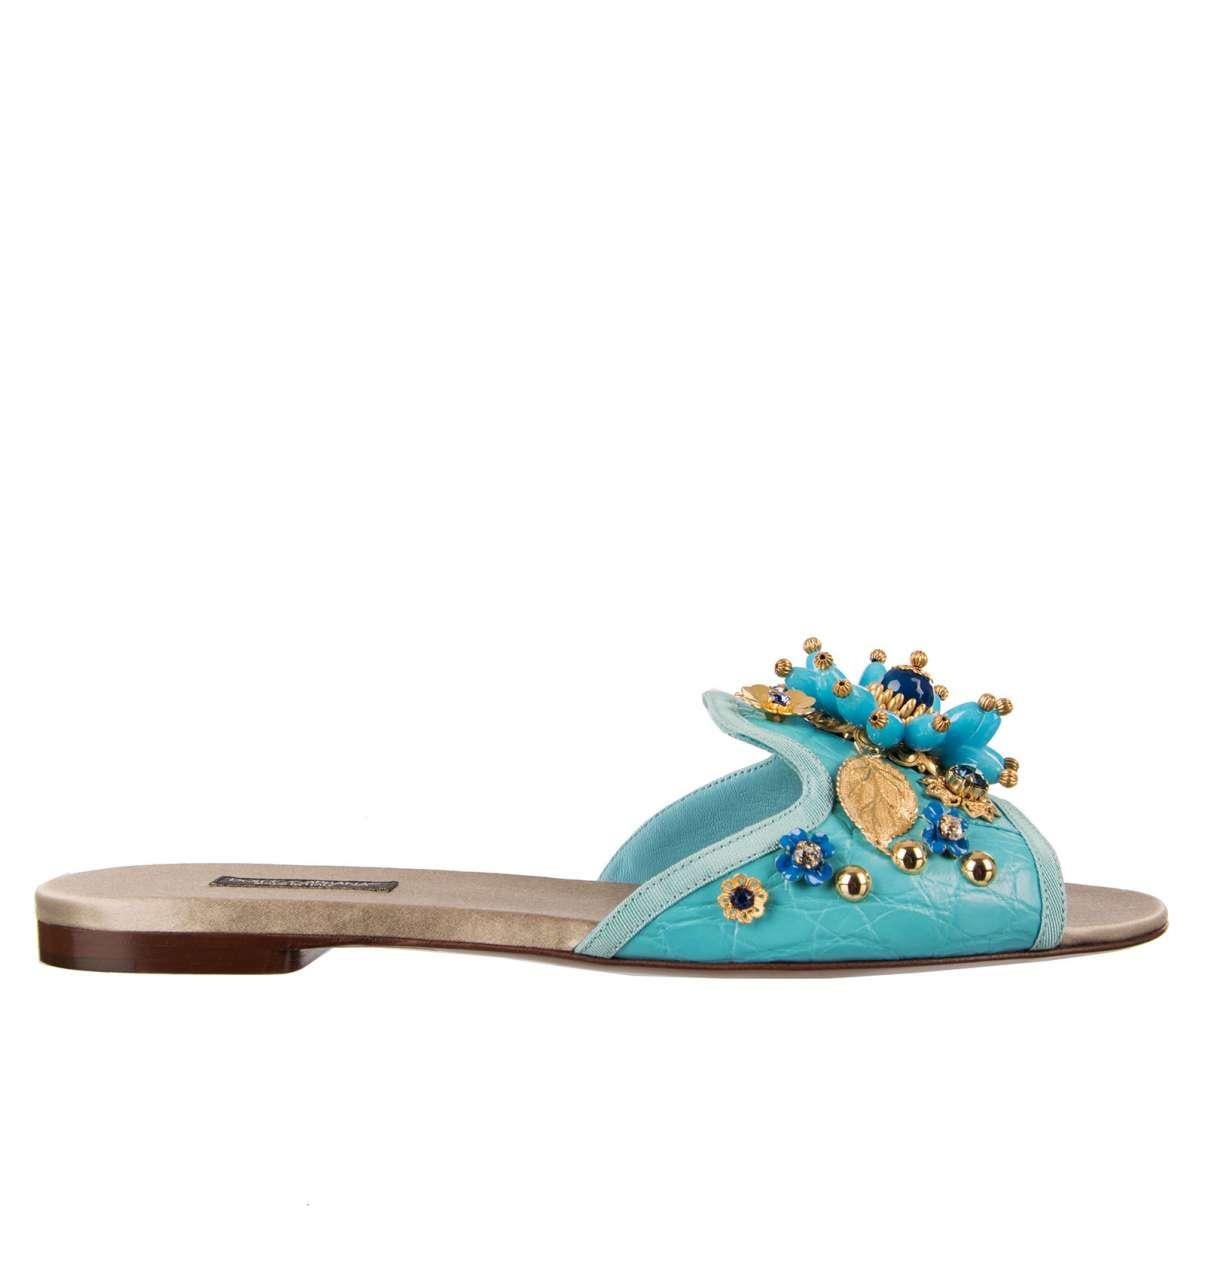 - Caiman Leather Slide Sandals BIANCA embellished with crystals, studs and brass applications in blue by DOLCE & GABBANA  - MADE IN ITALY - Former RRP: EUR 1.150 - New with Tag and Box - Model: CQ0022-A2I67-8L698 - Material: 79% Caiman Leather, 21%